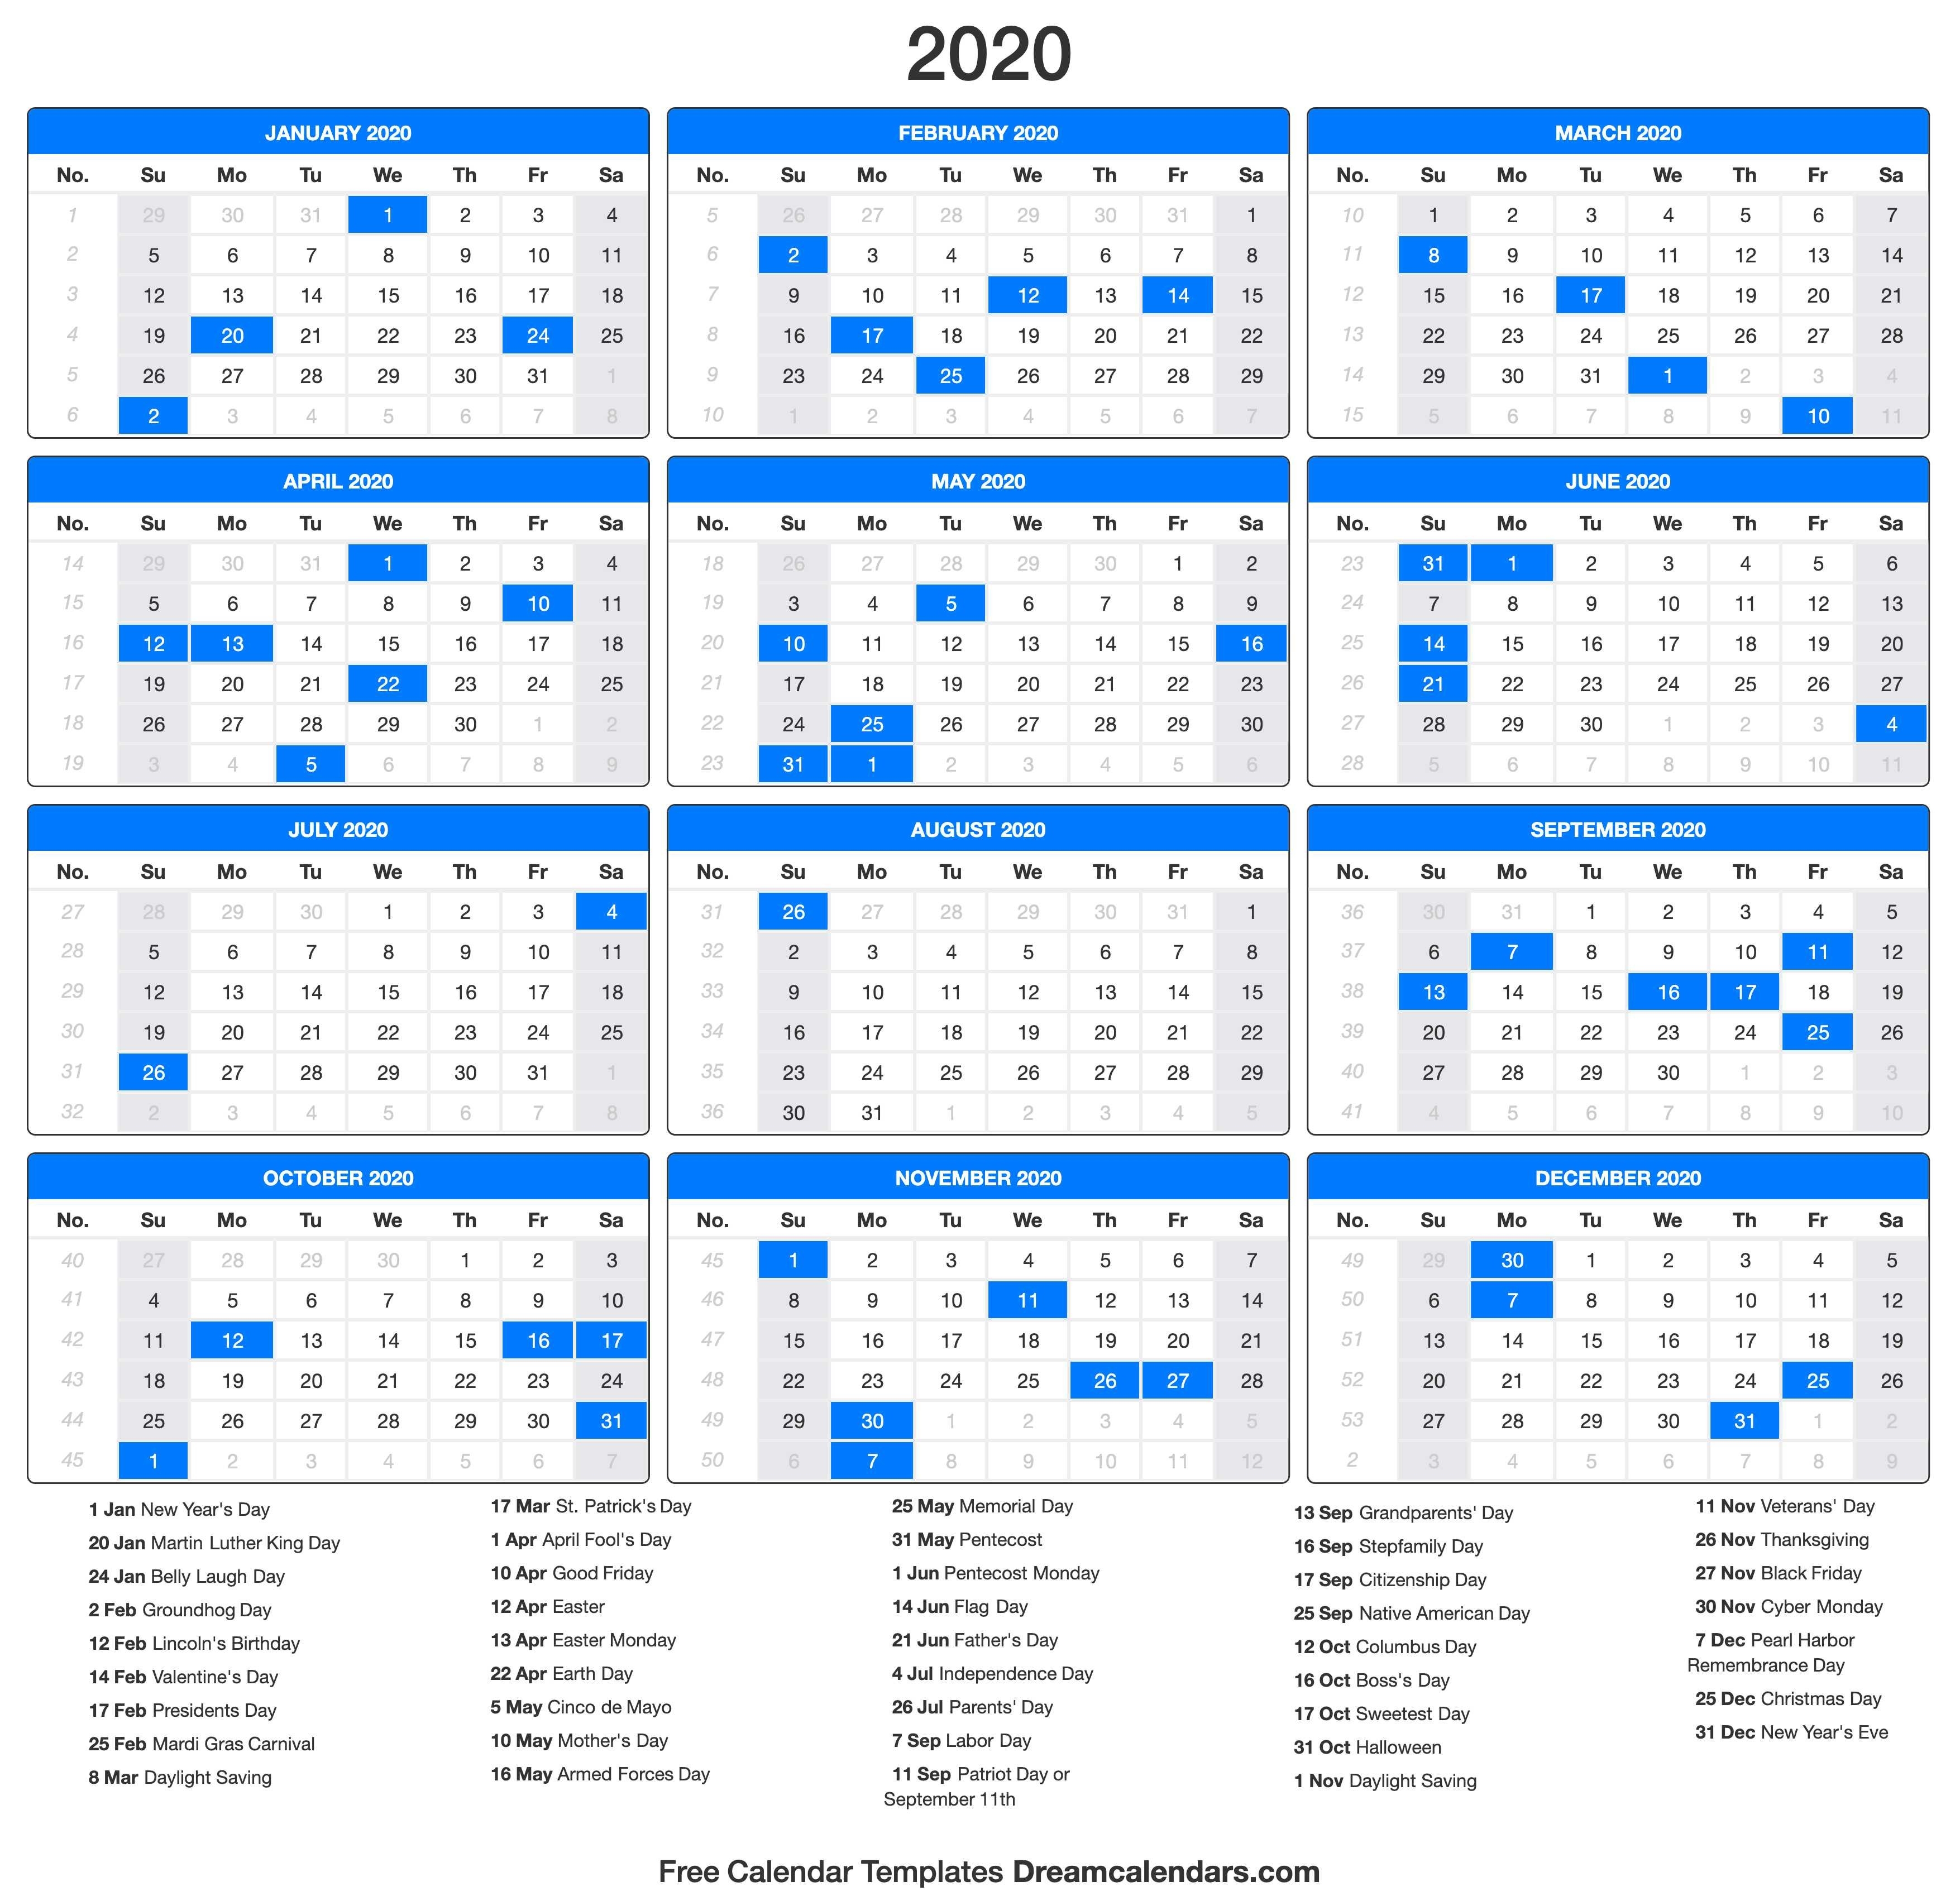 Make A Great 2020 Calendar Free! | Posts By Helena Orstem-Monthly Catholic Church Calendar 2020-2020 Year A